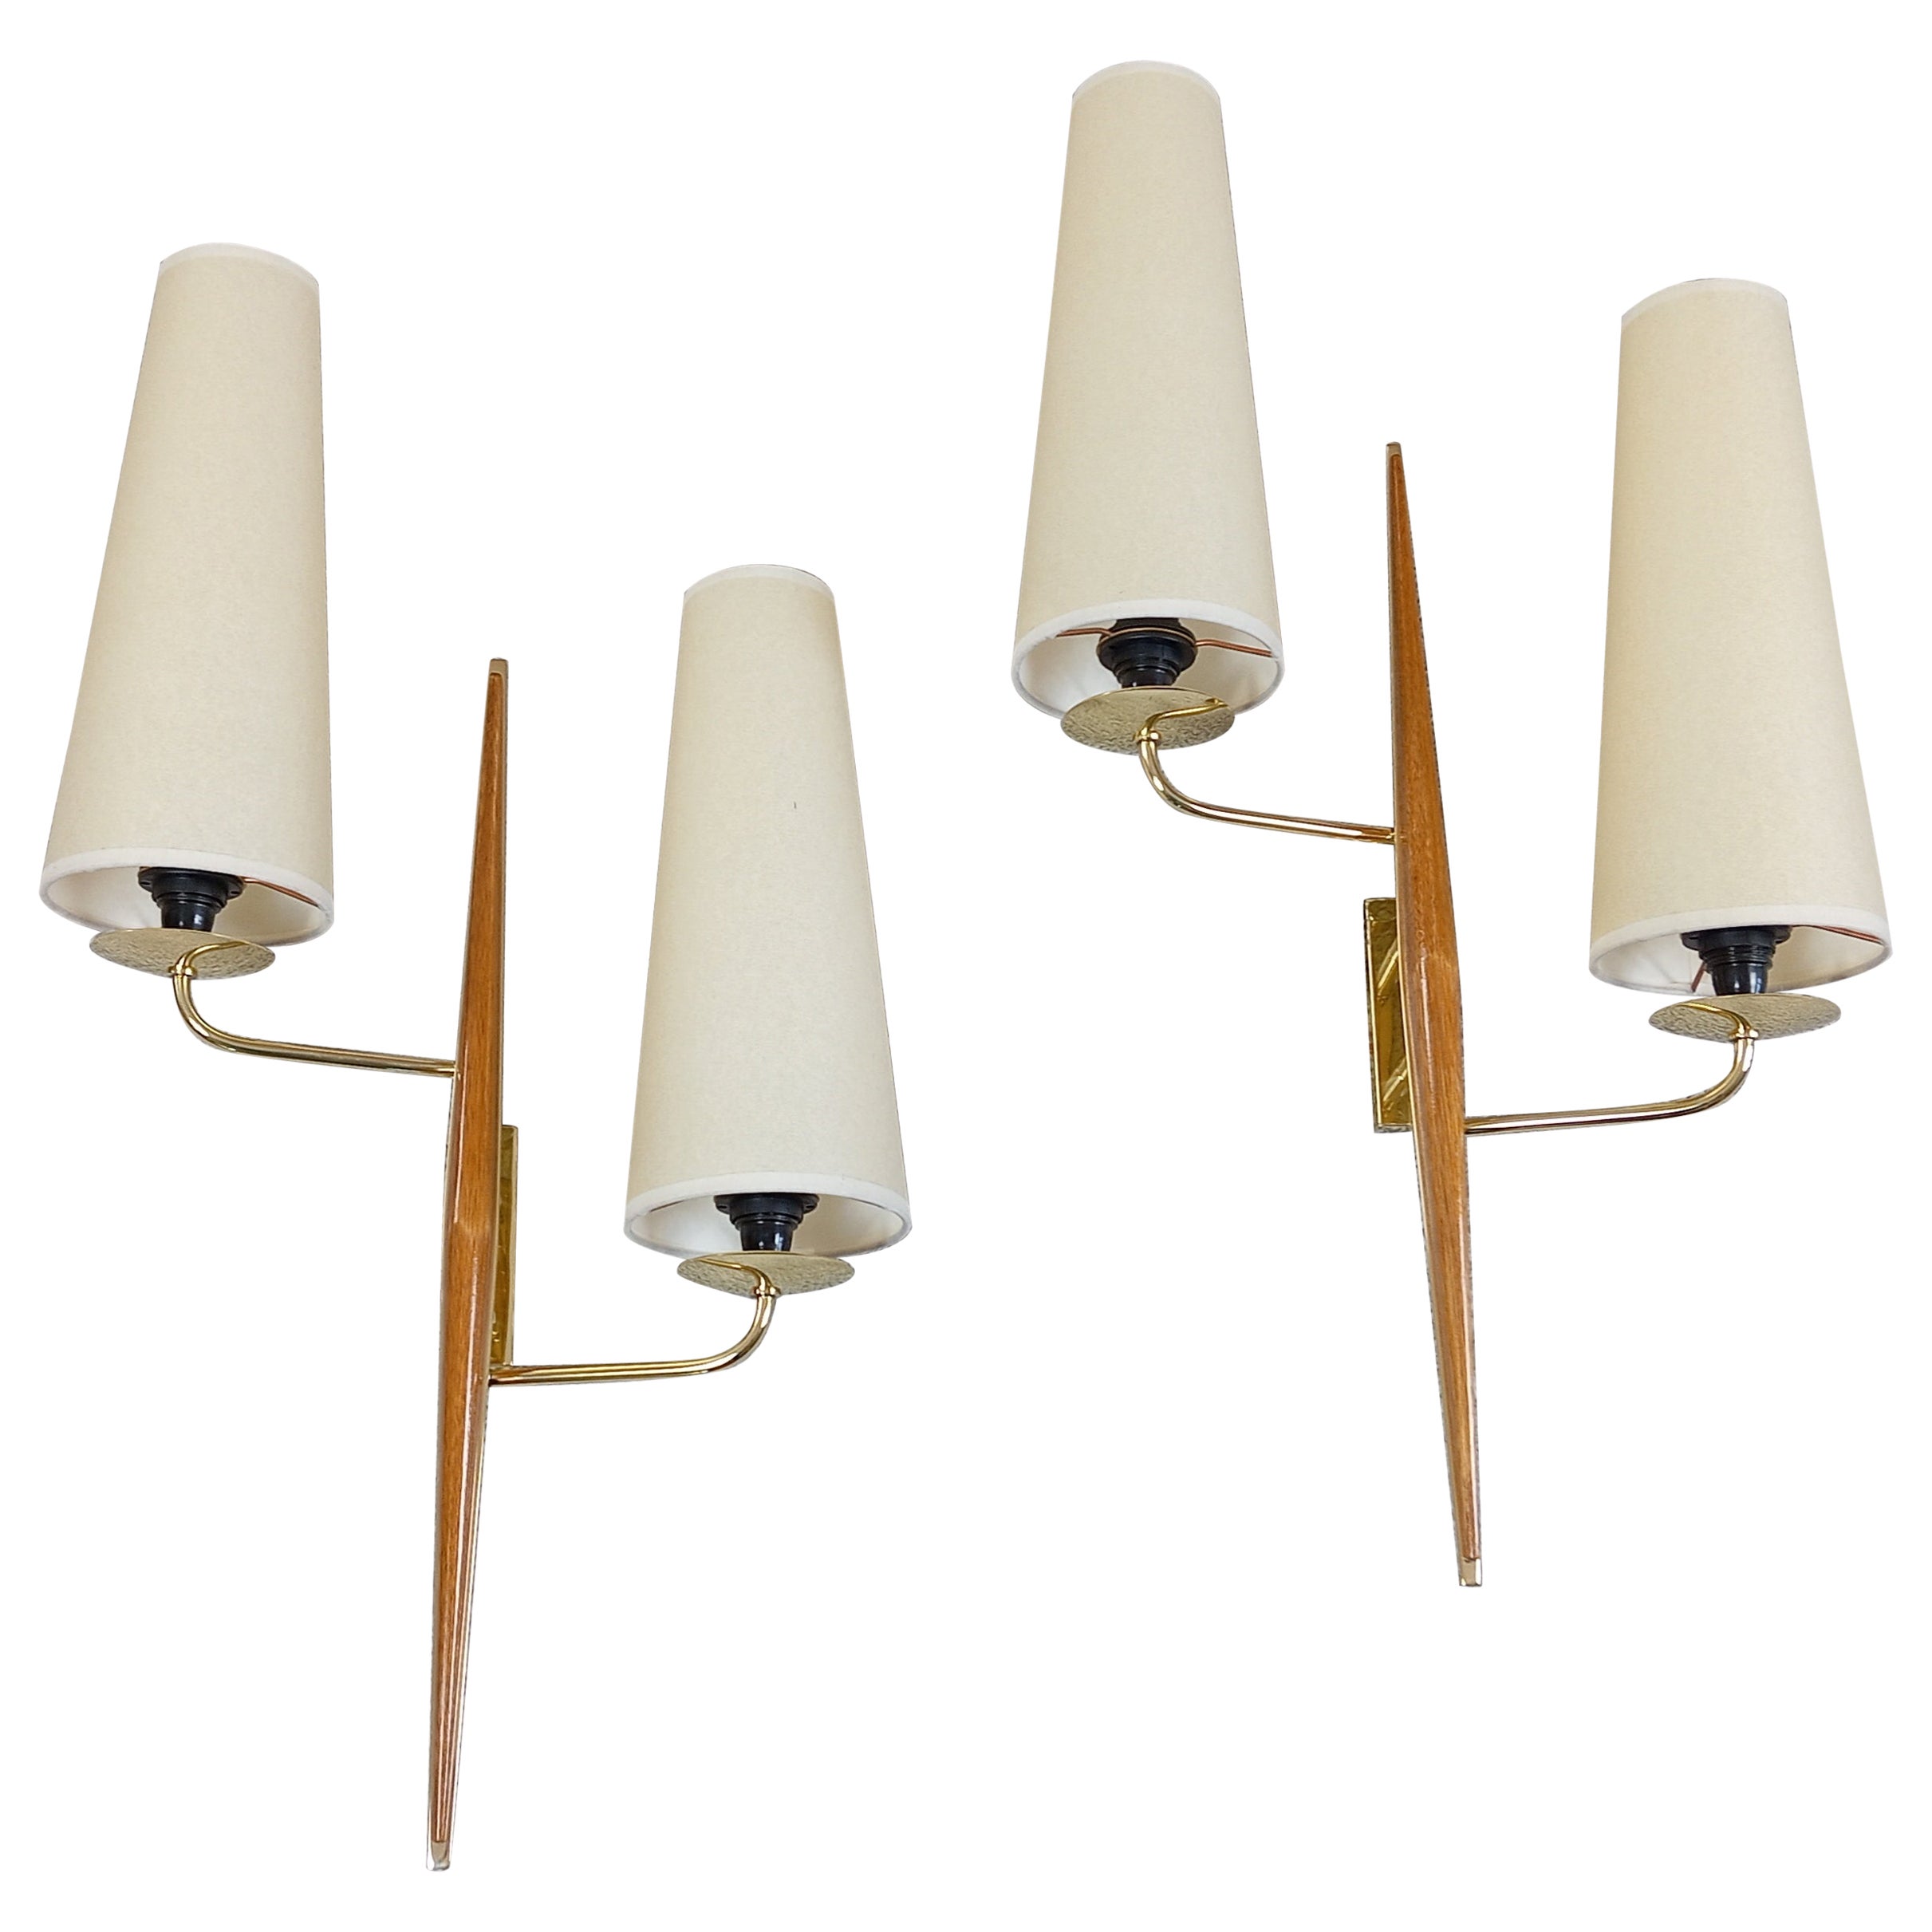 Pair of double sconces in brass and teak wood, Maison Lunel circa 1950